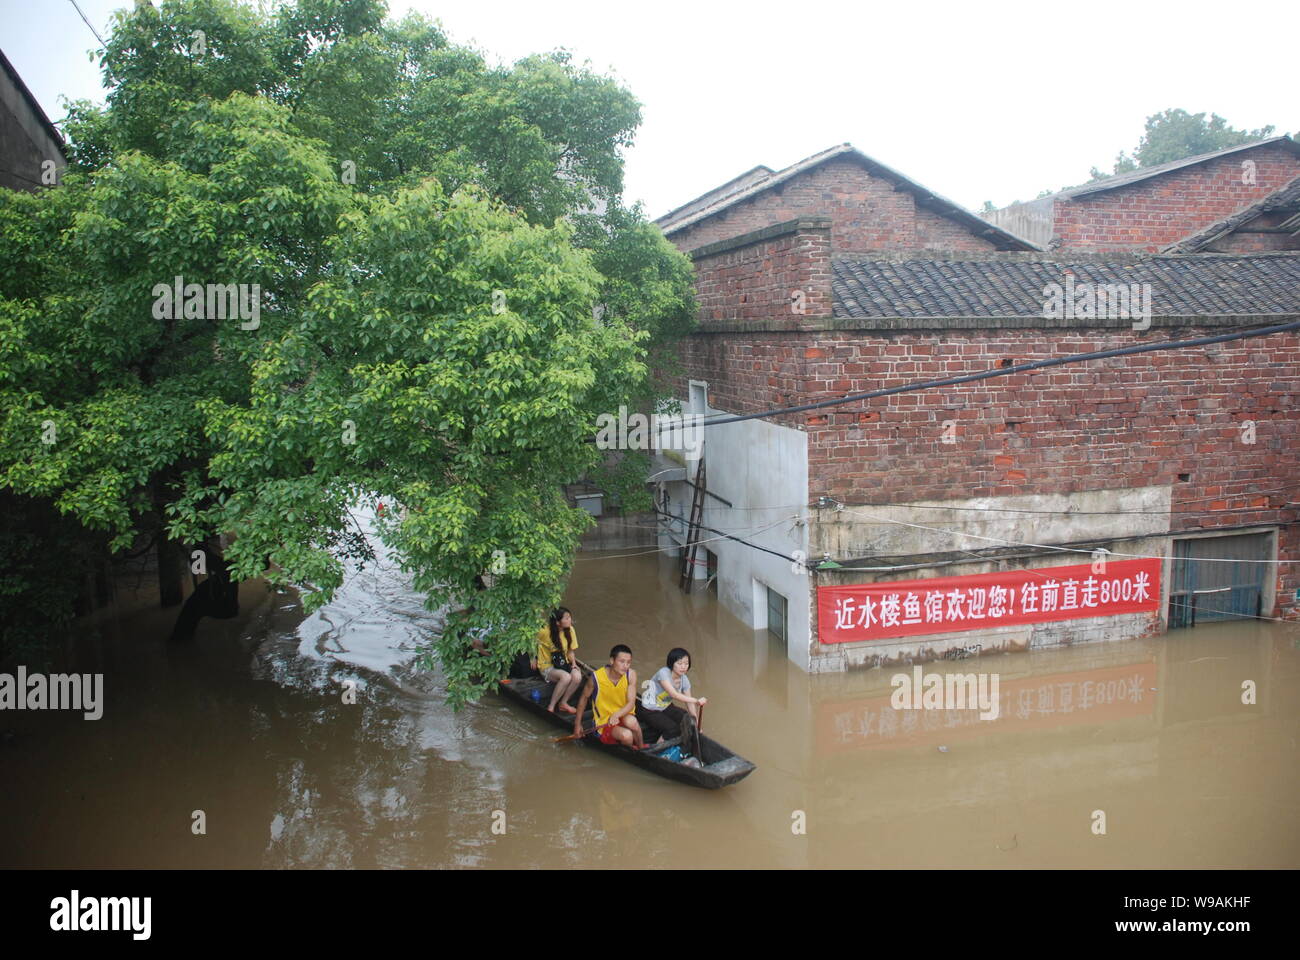 Local residents evacuate from flooded area in Xiangtan city, central Chinas Hunan province, June 25, 2010.   Floods in China have killed 377 people th Stock Photo